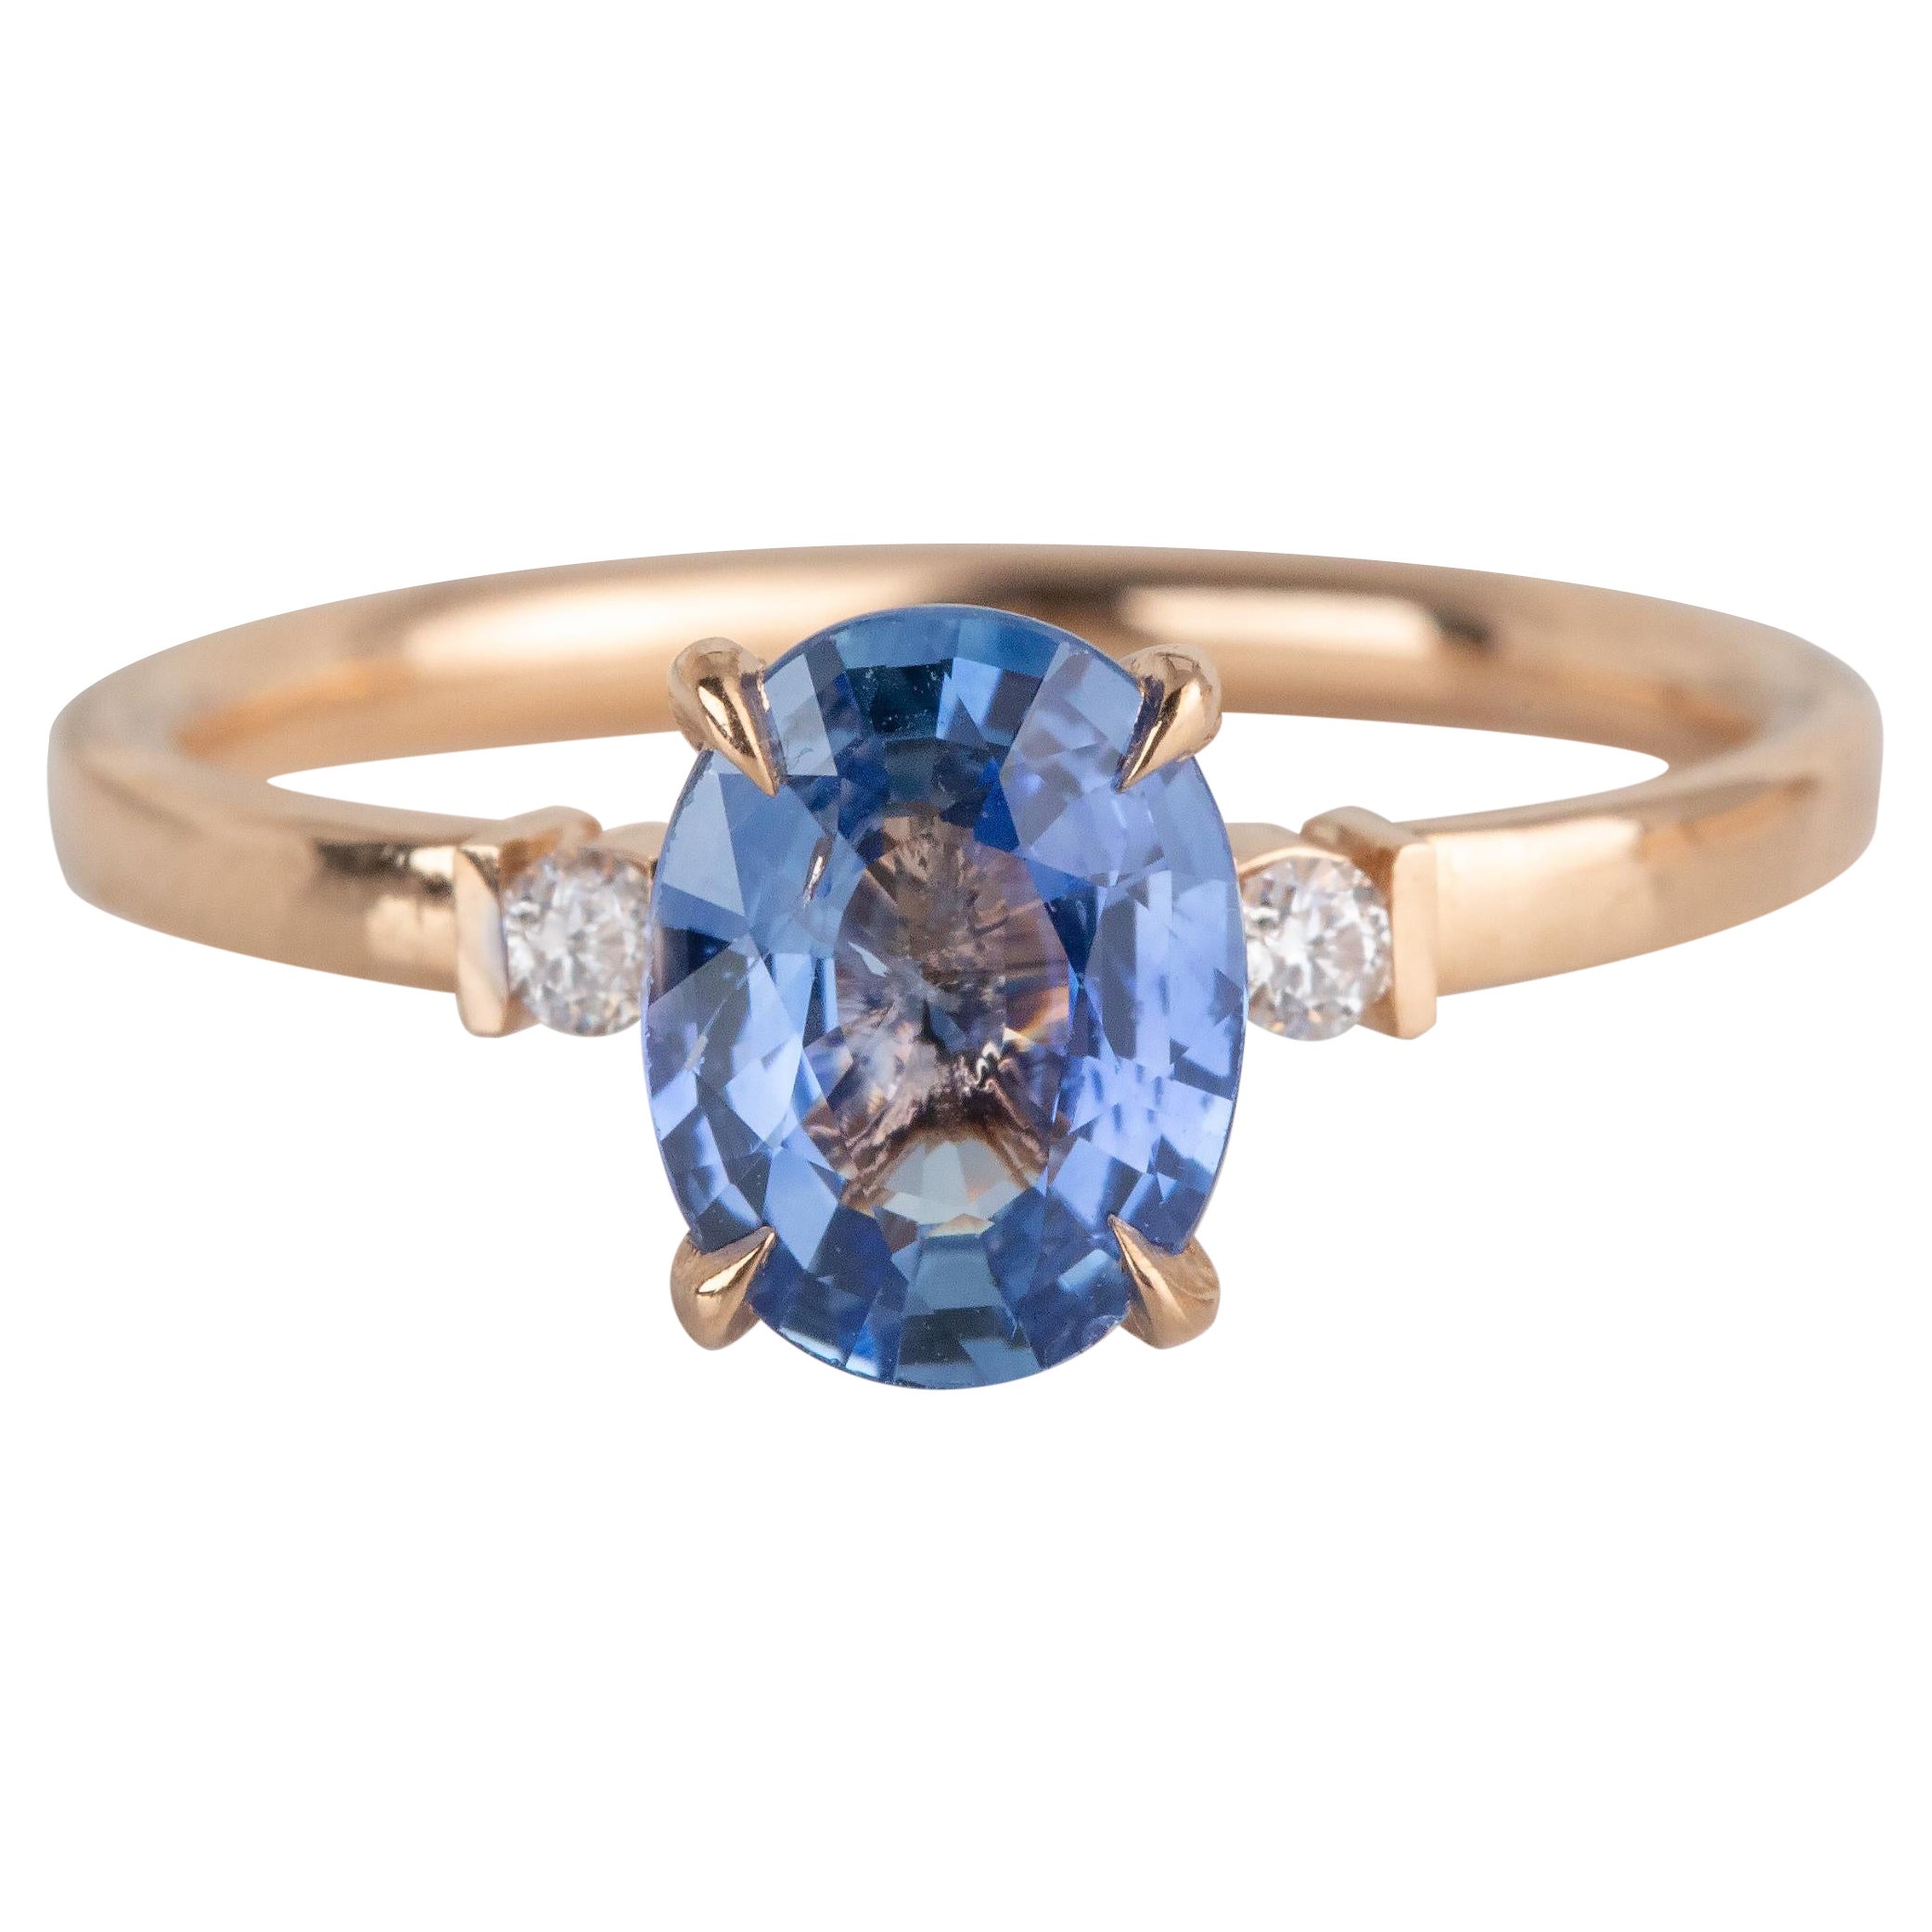 For Sale:  14k Rose Gold 1.37 Ct. Oval Sapphire and Diamond Ring